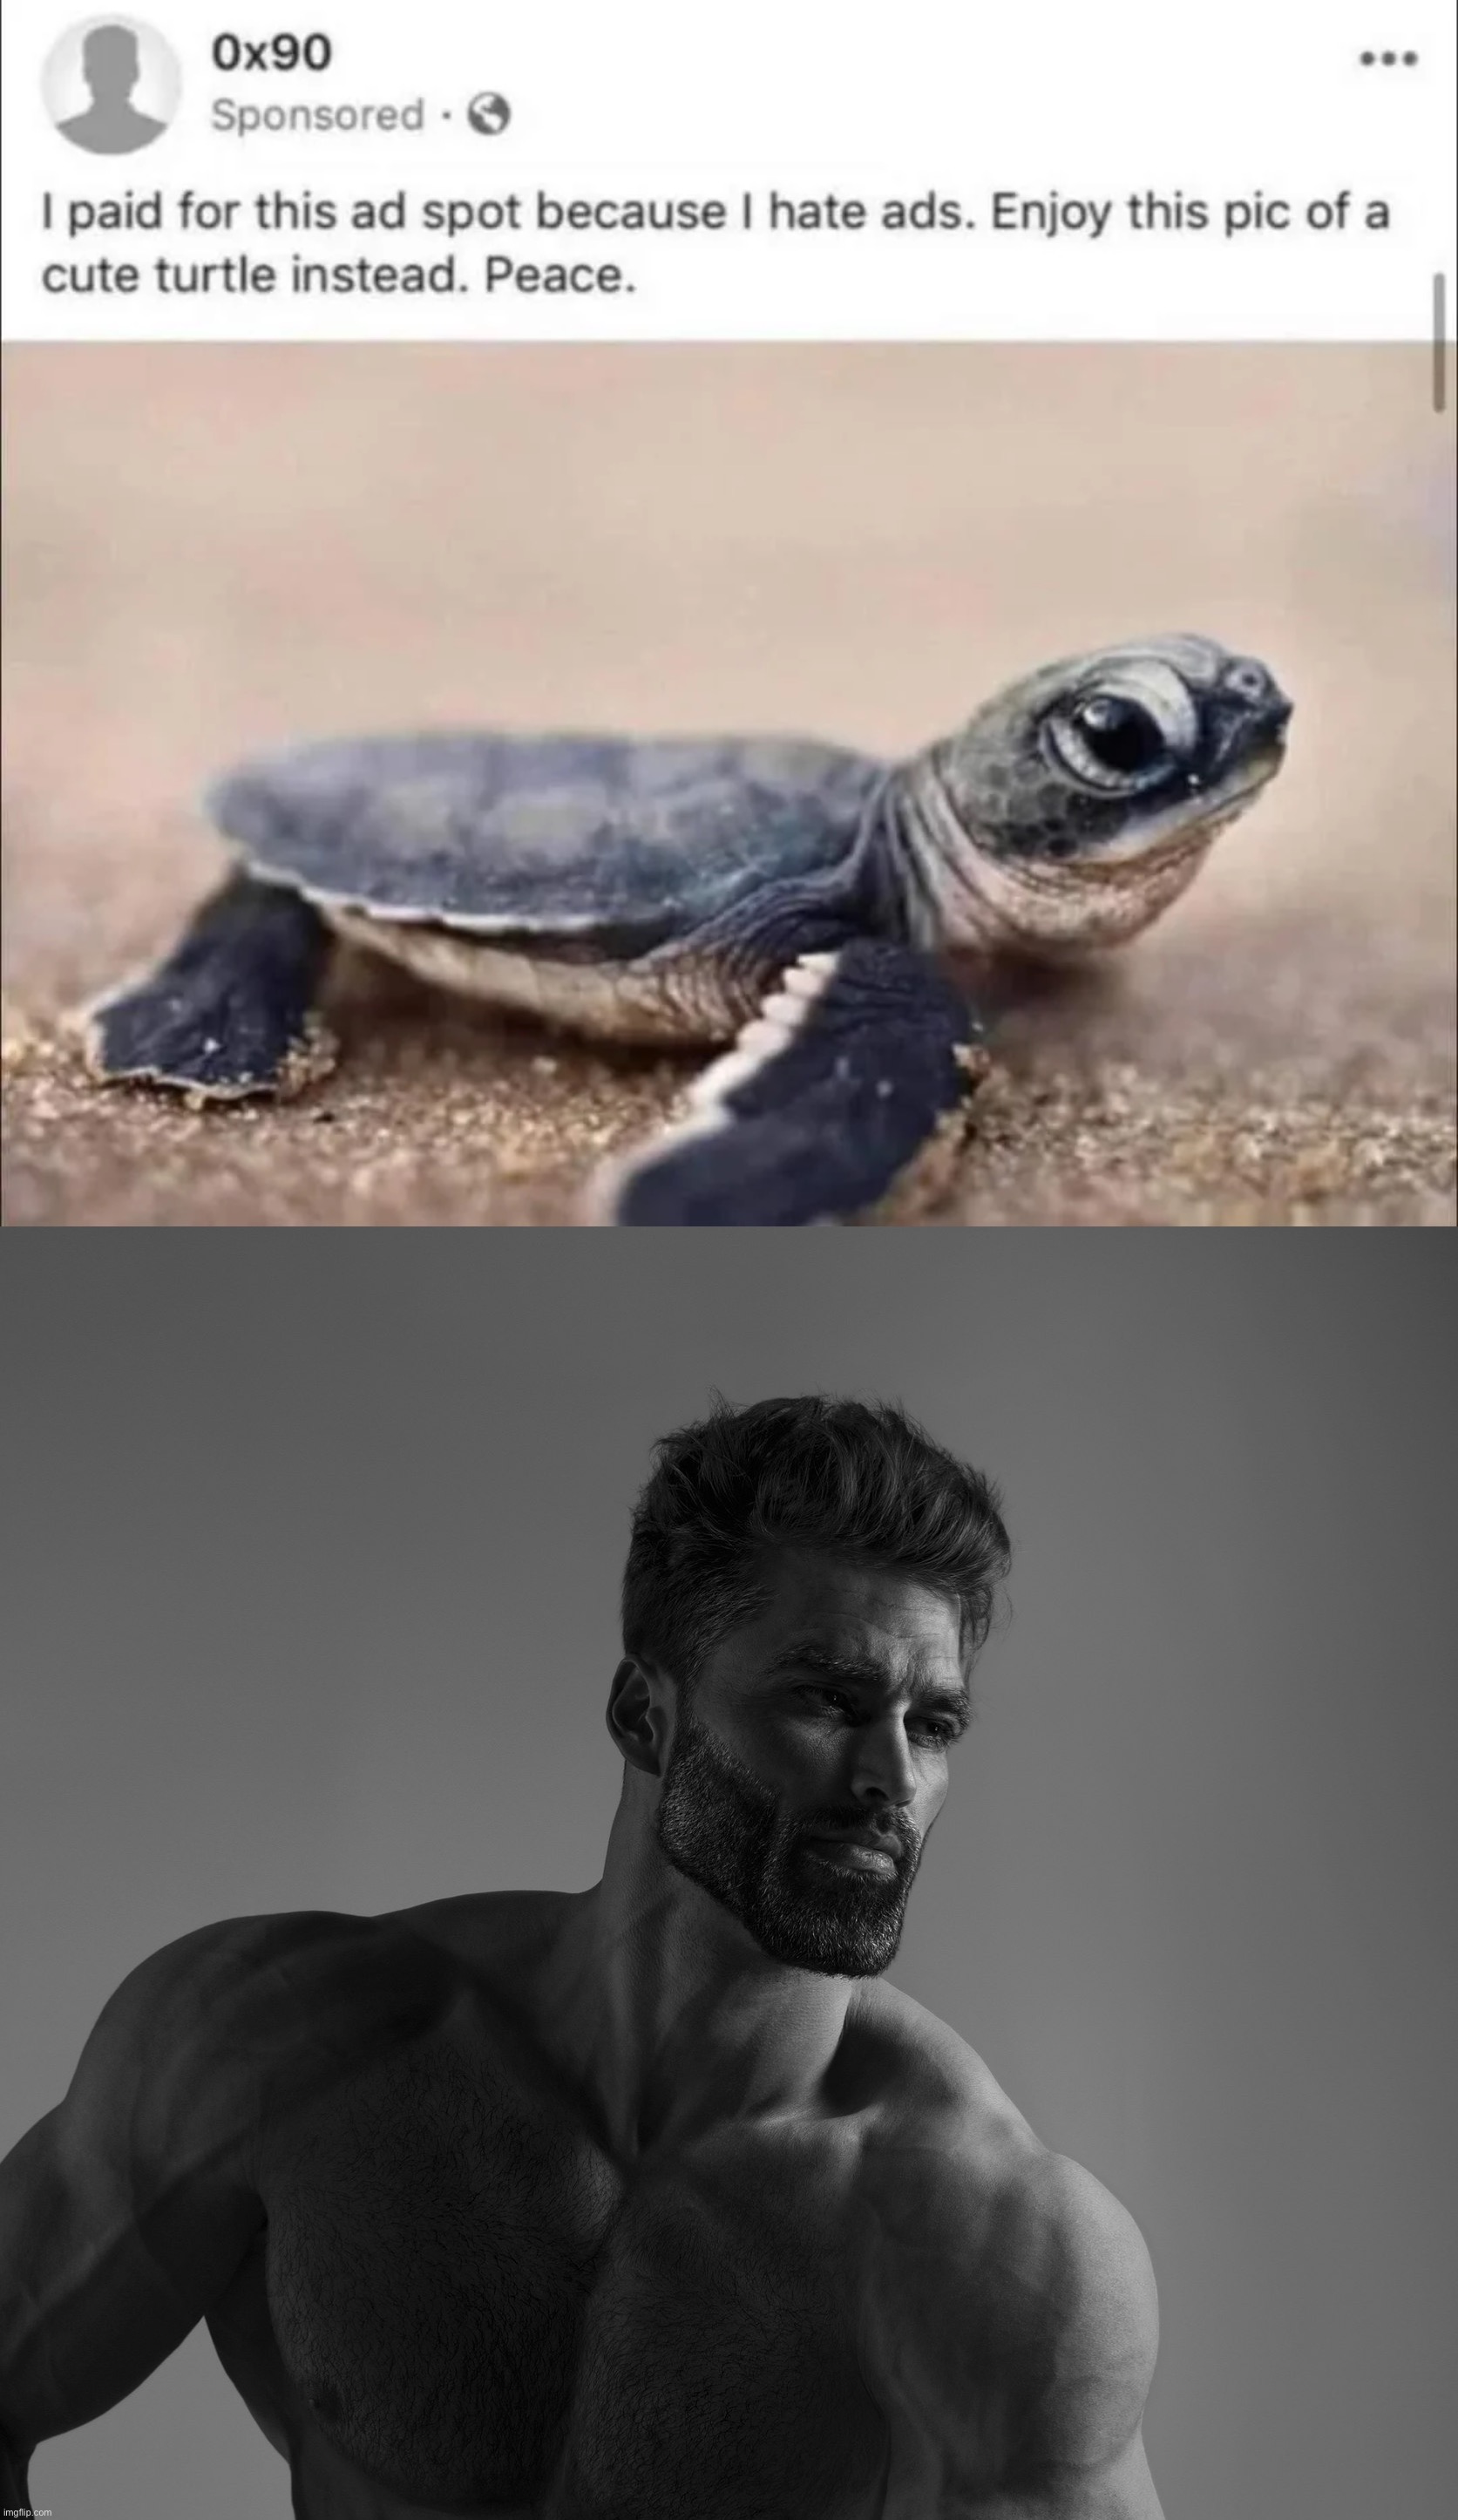 we need more people like that guy | image tagged in giga chad,repost,ads,turtle | made w/ Imgflip meme maker